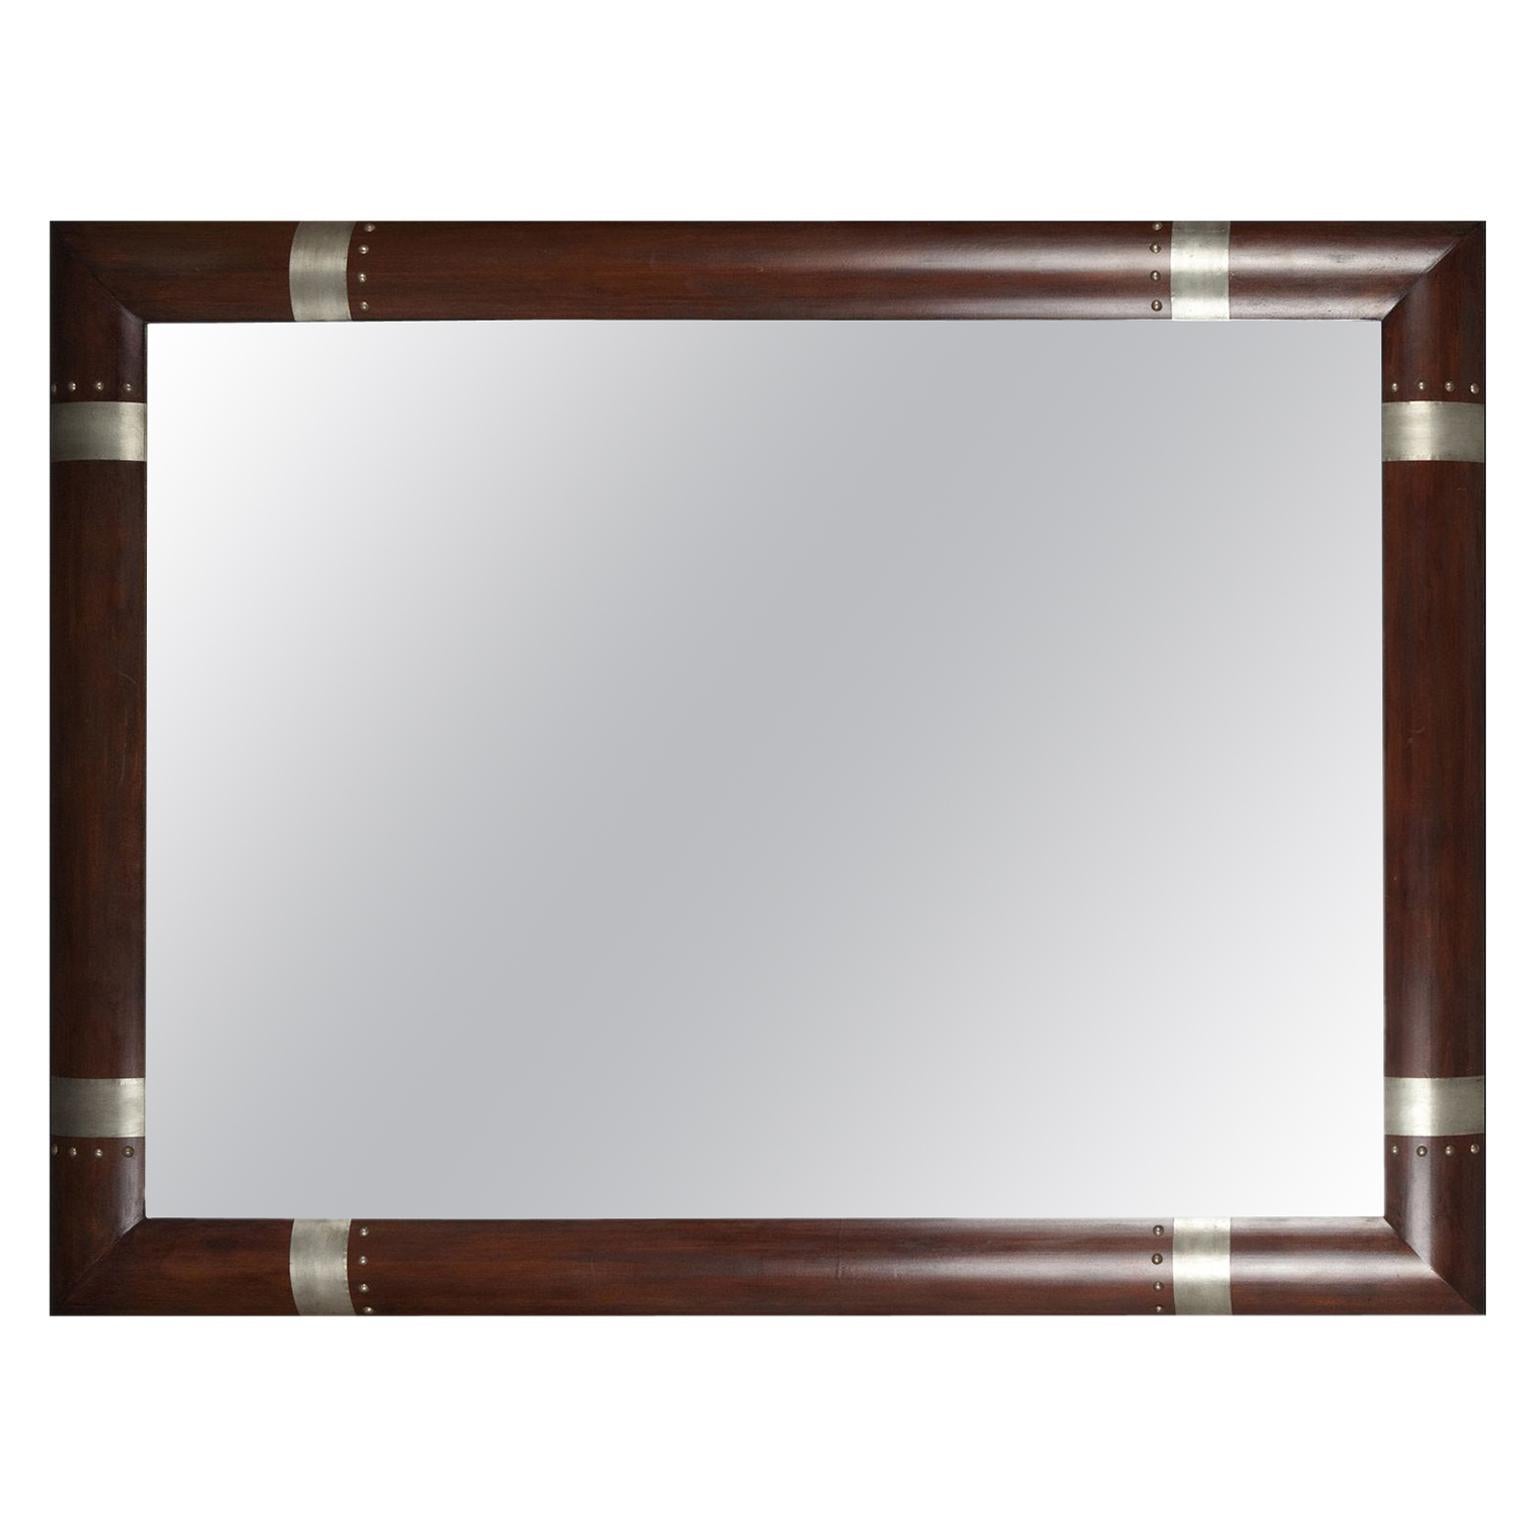 Modernist Mirror with Wood Frame and Silvered Inlaid Patterns